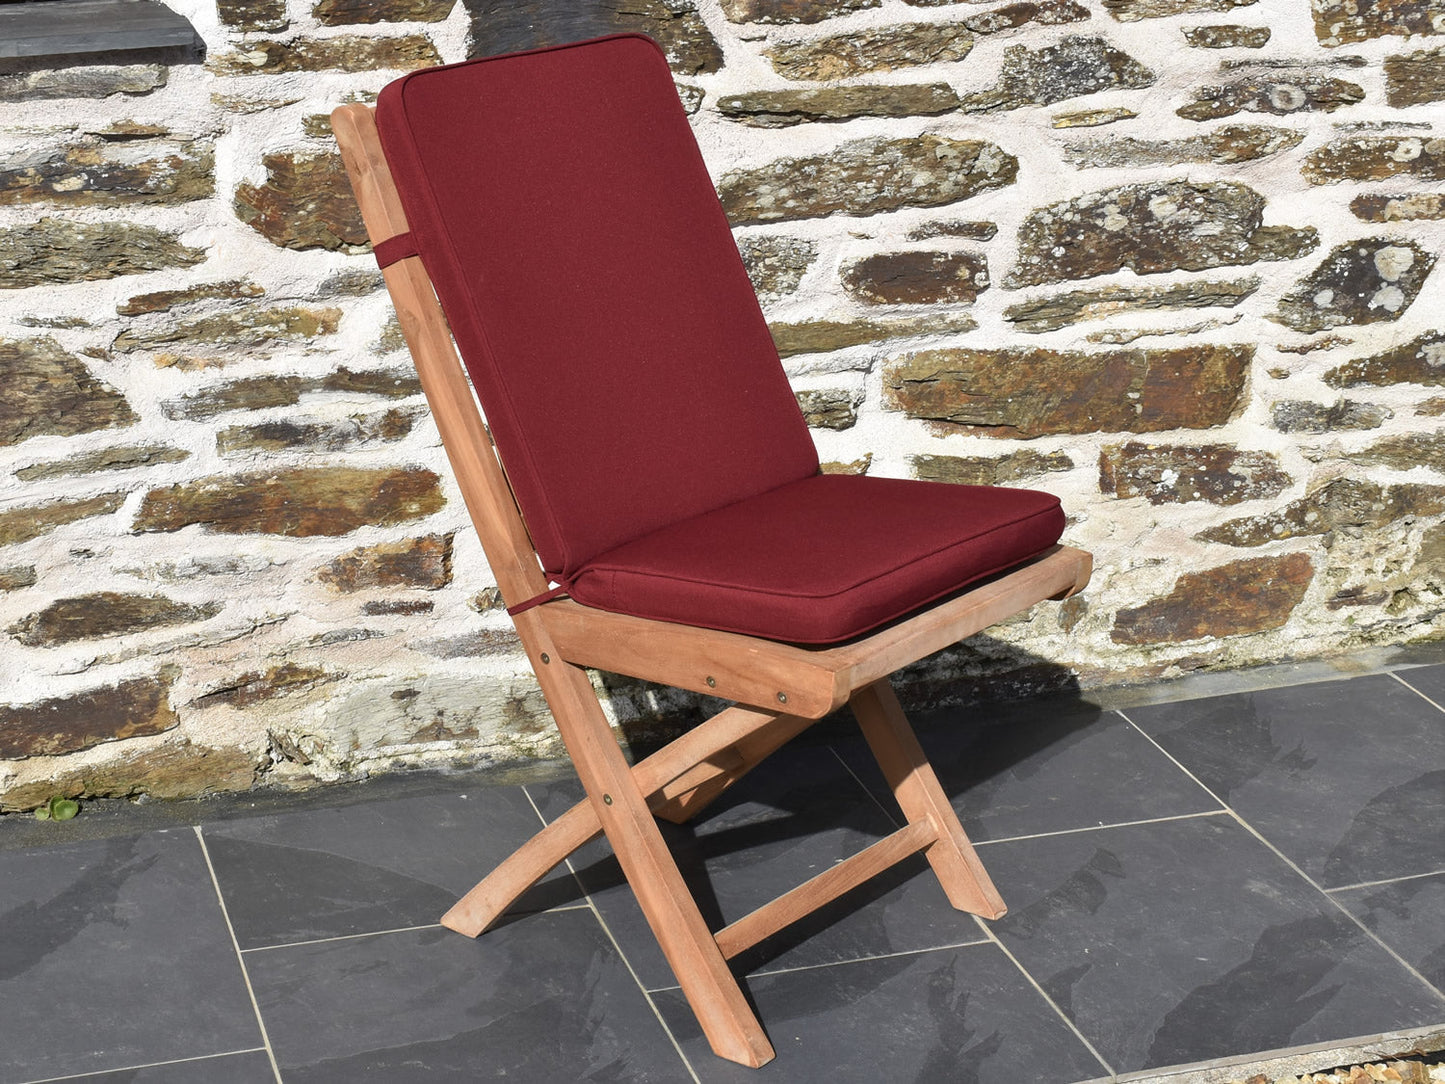 Classic burgundy wine colour folding seat pad and back garden chair cushion, perfect for teak folding garden chairs